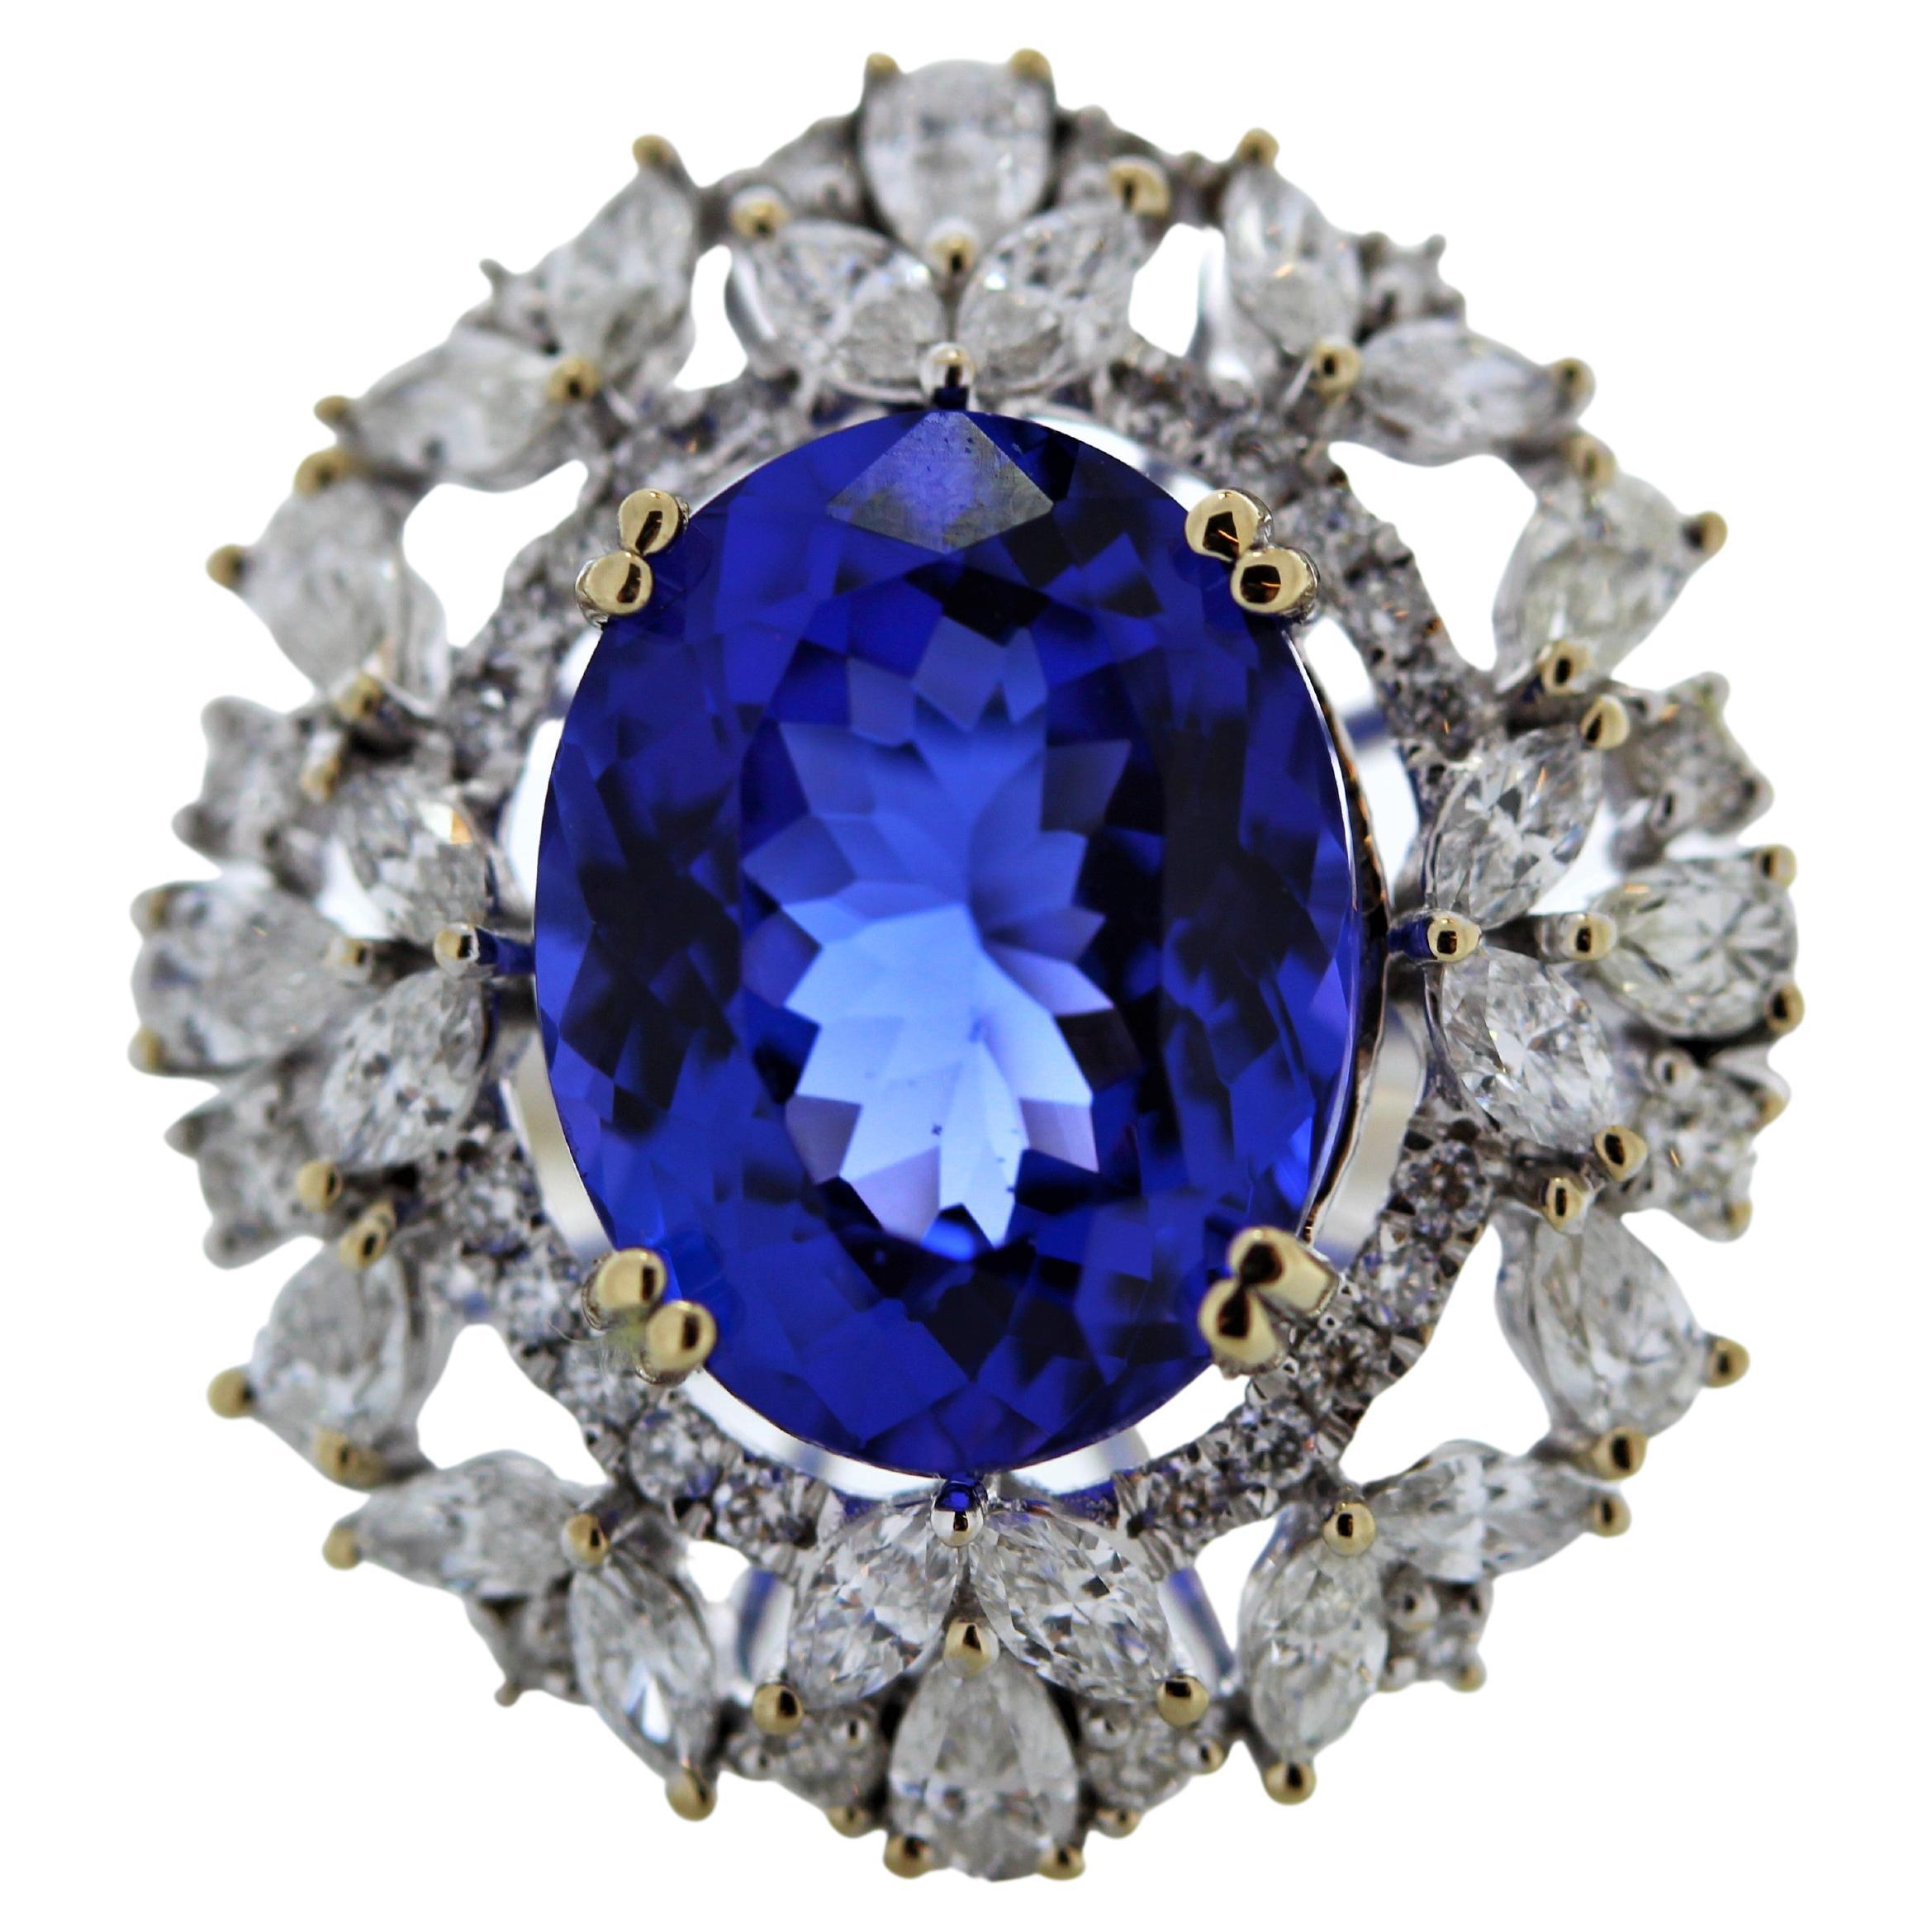 5.62ct Tanzanite and 1.02ctw Diamond Ring in 18k White Gold For Sale